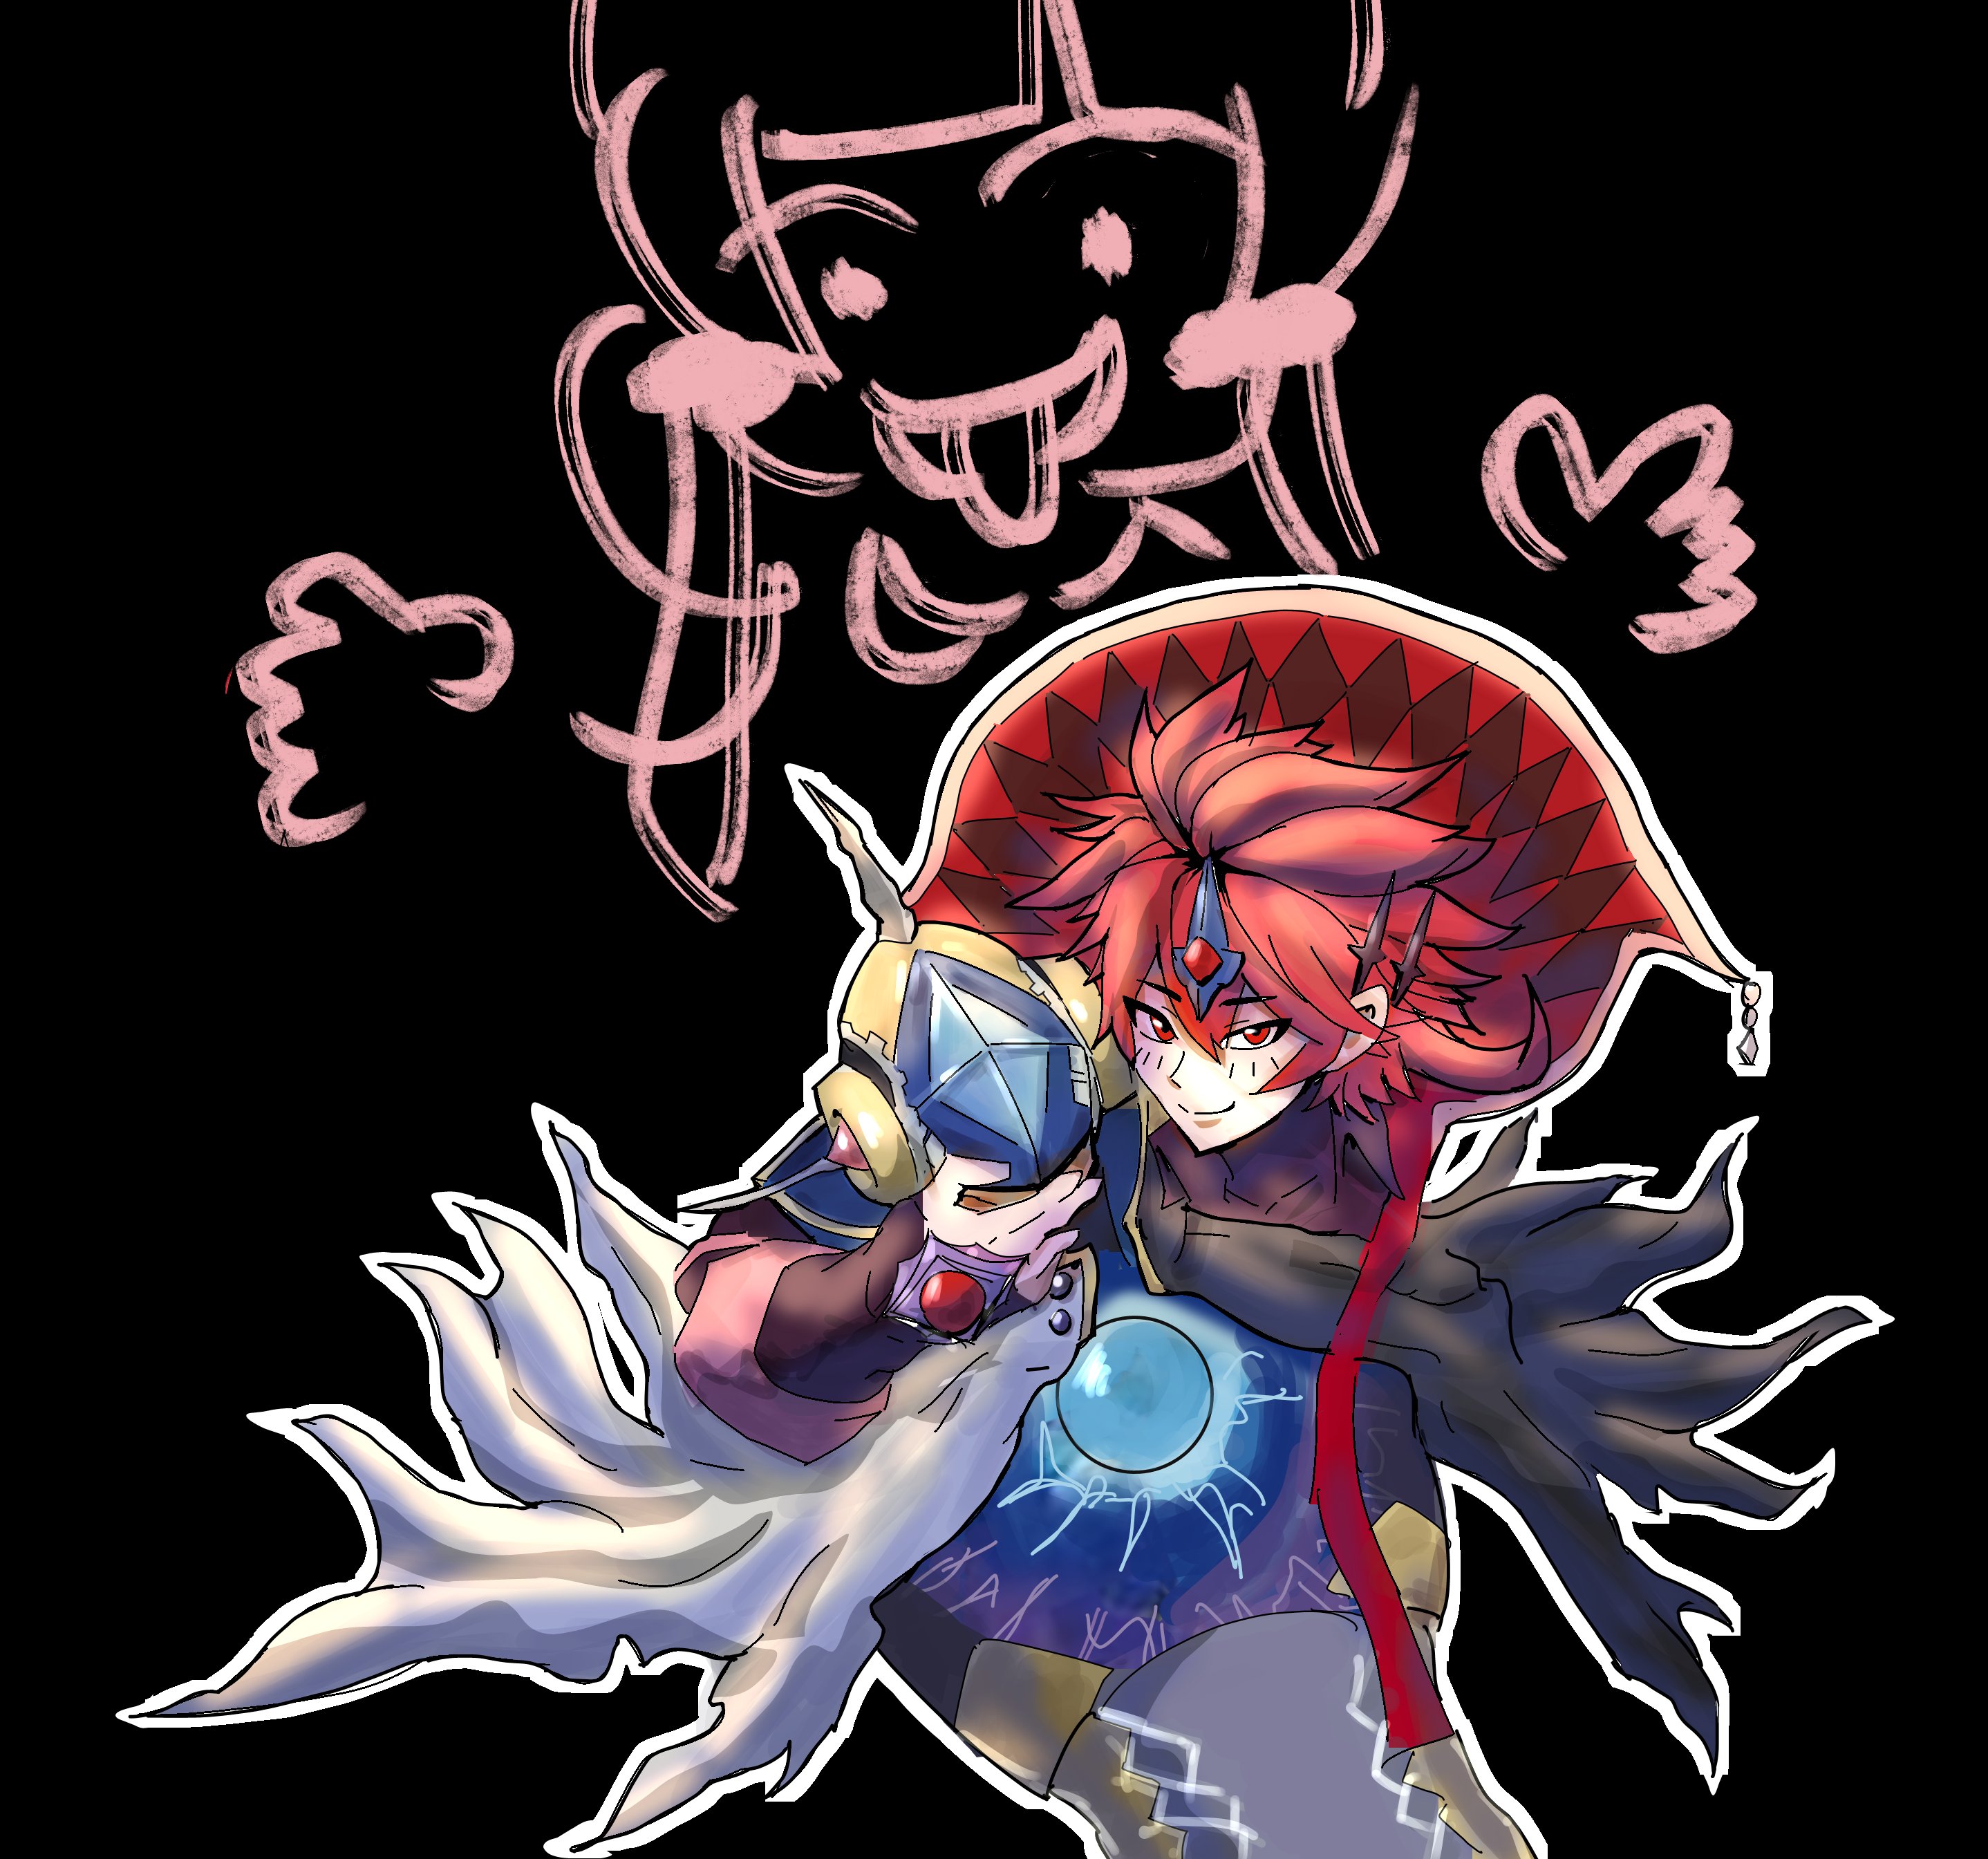 Fanart of Aluber, the Jester of Despia and Mekk-Knight Blue Sky, the icons used by Asixa and Bionic respectively during Rosemi's stream on 22 January 2024. By ダミアン大好き🌹(@damiandaisuki)